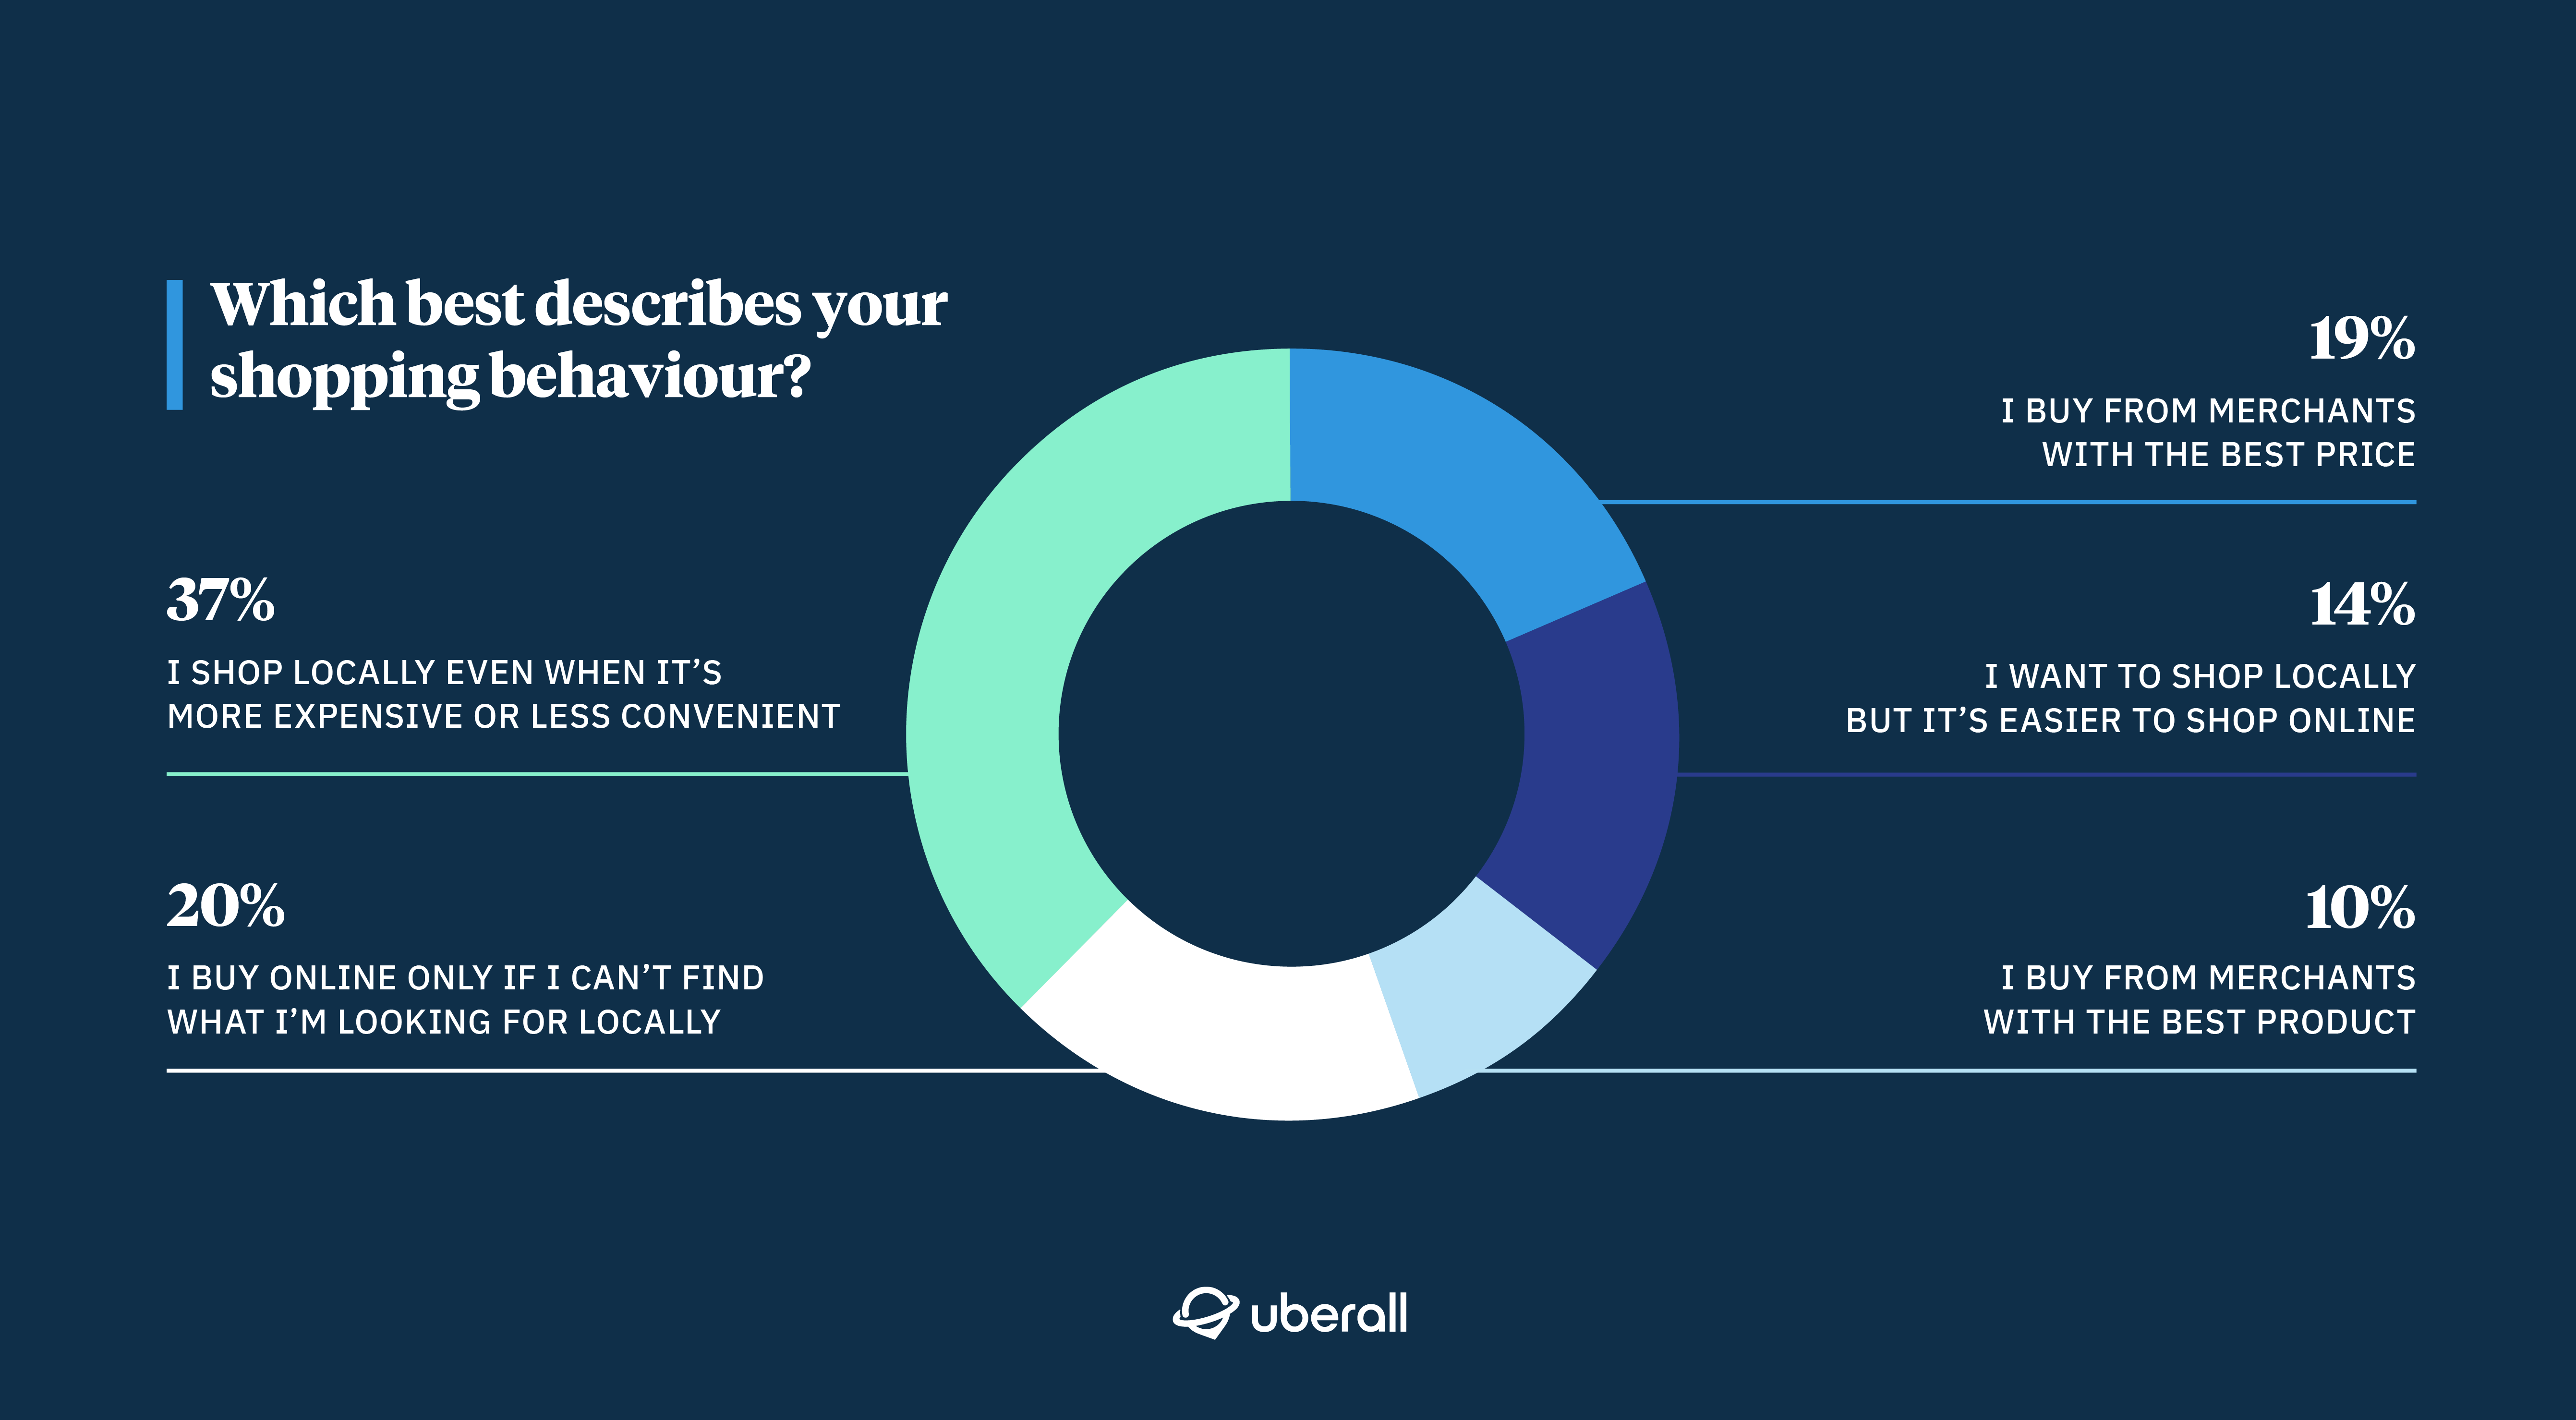 Consumer survey results to the question "Which best describes your shopping behaviour?"